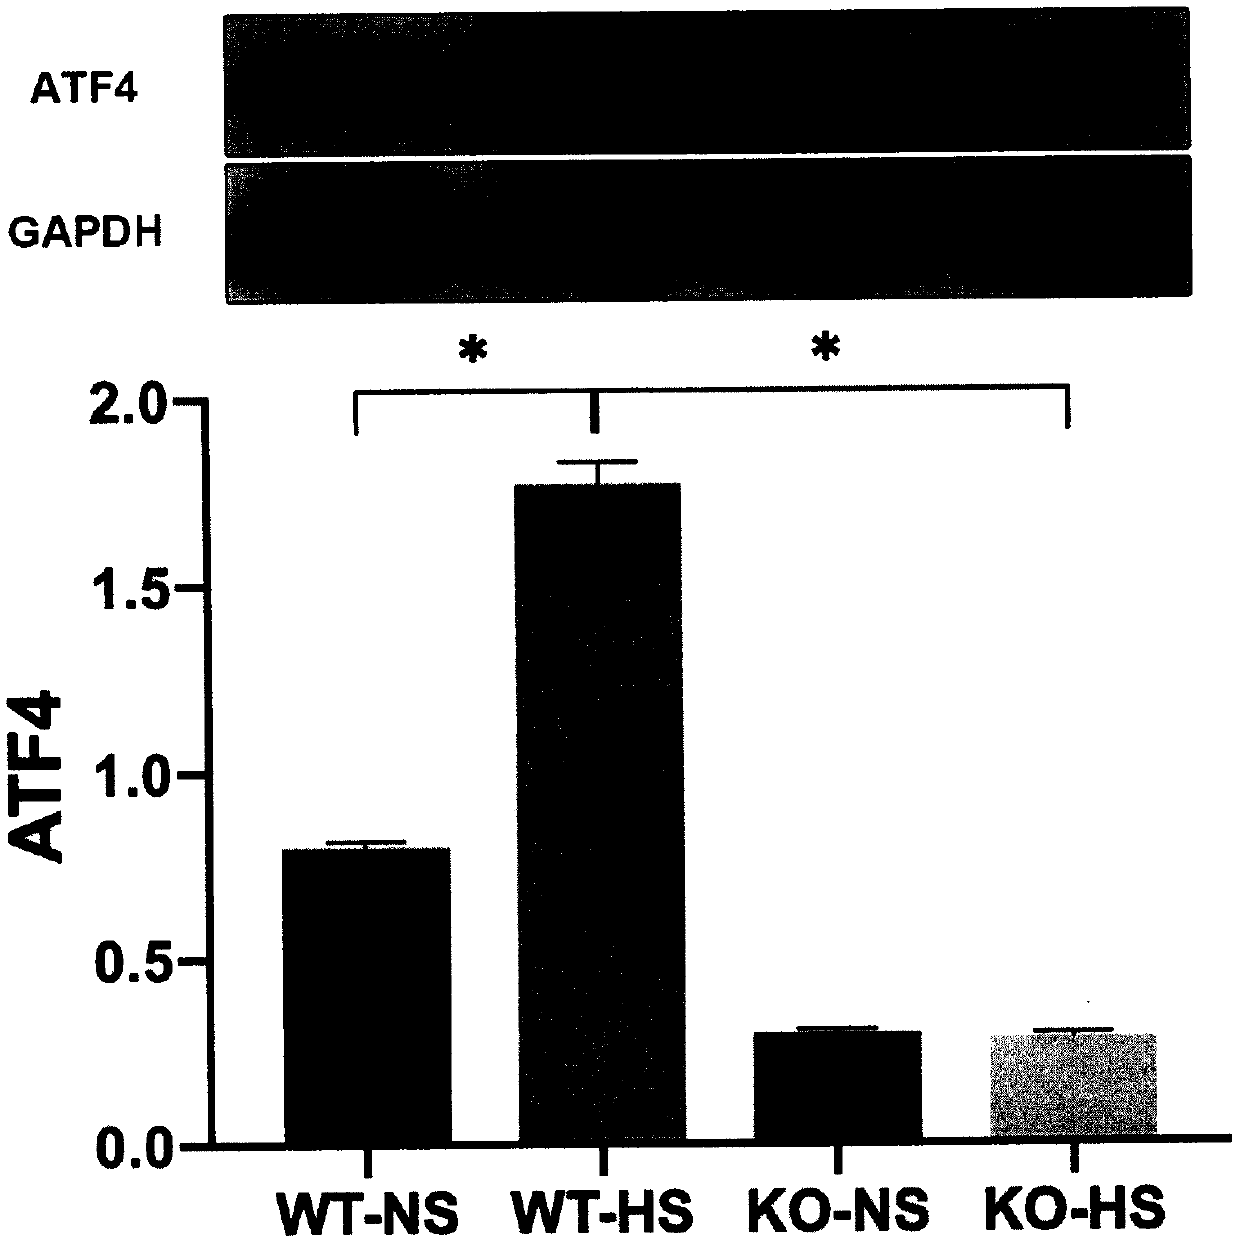 Gene-ATF4 capable of retarding blood pressure rise in high-salt induced mice